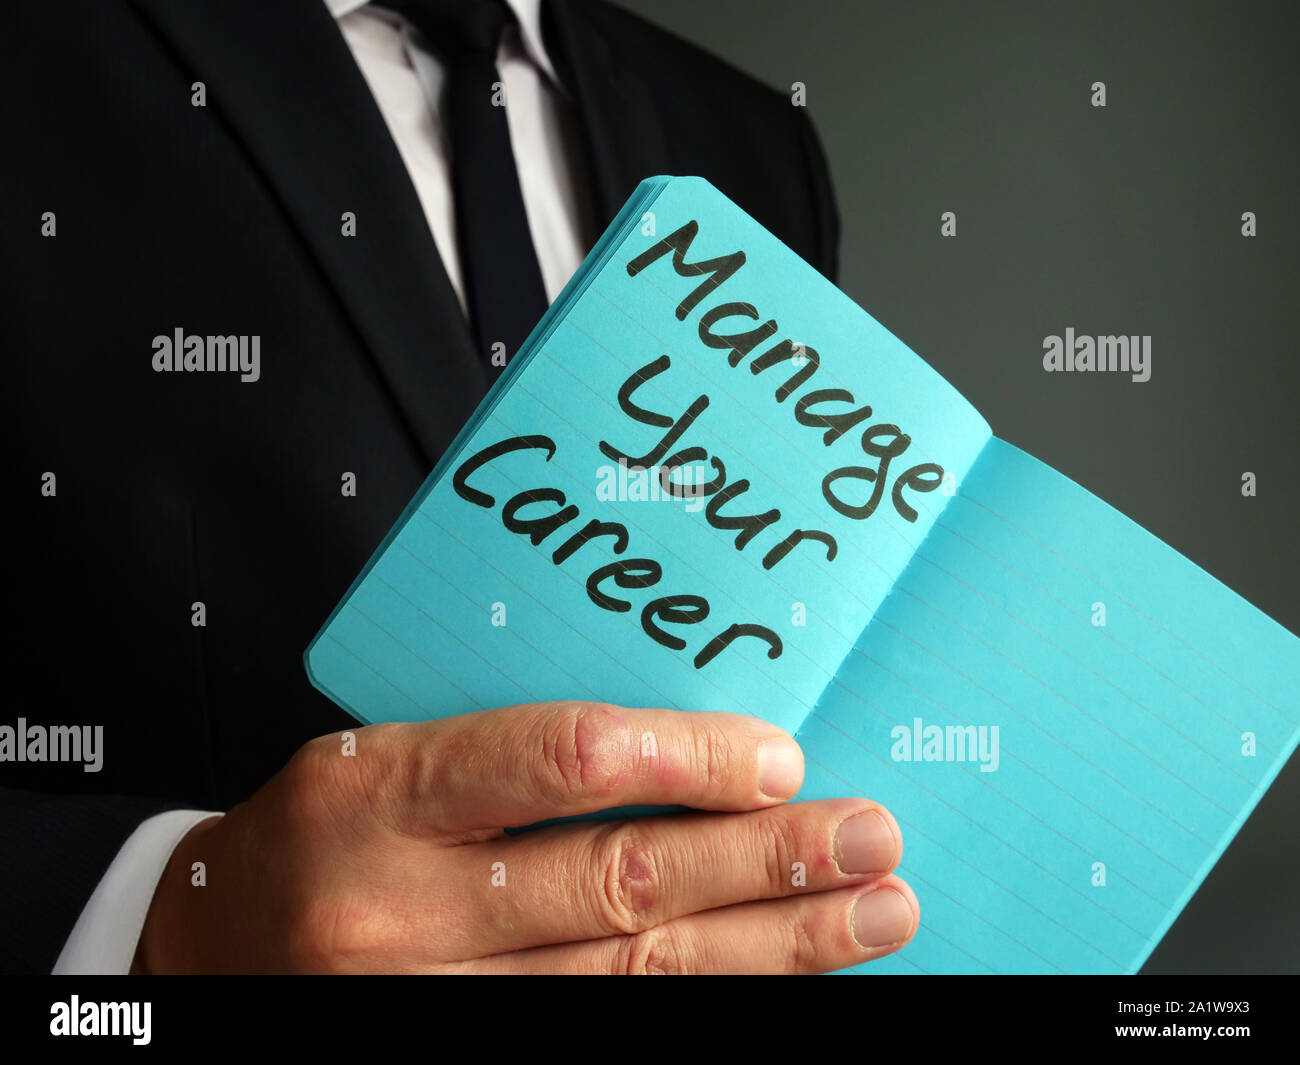 Manage your career handwritten on the page. Stock Photo